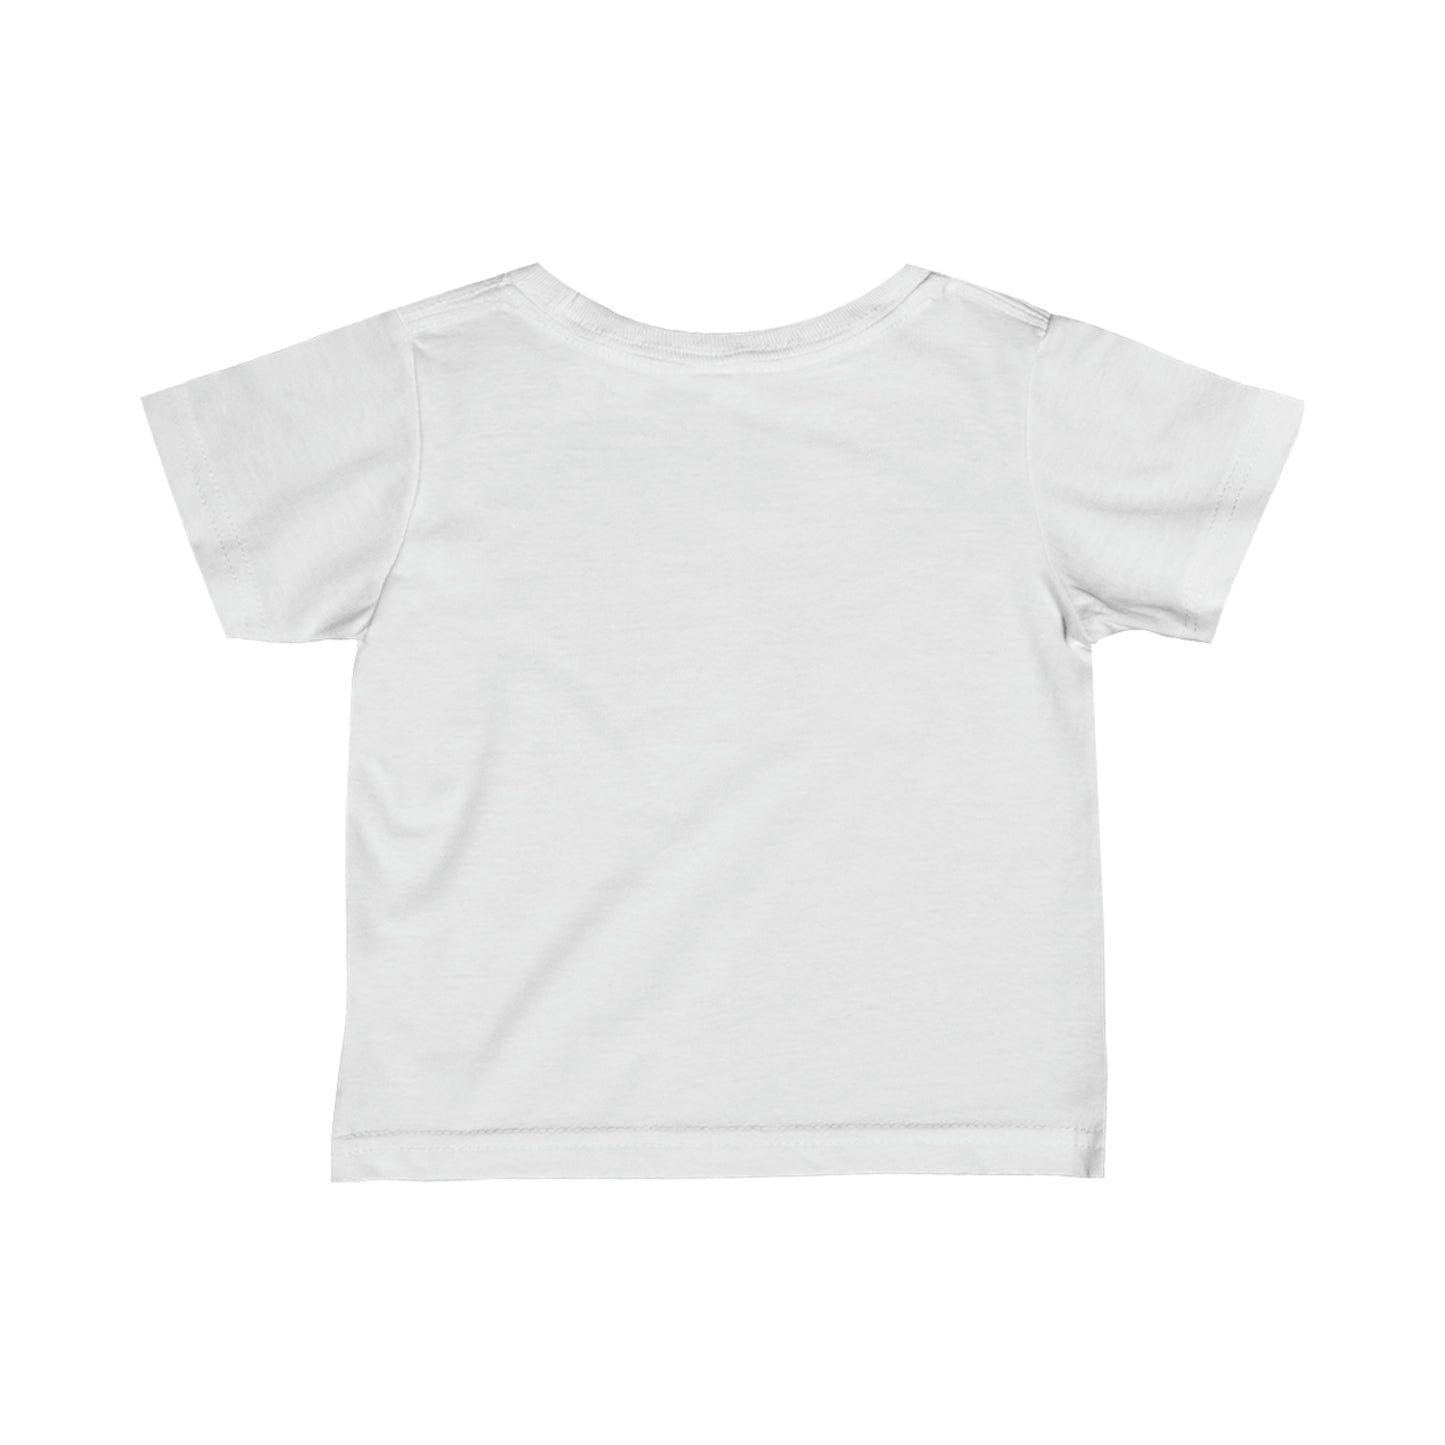 The Daydreamer Infant Tee